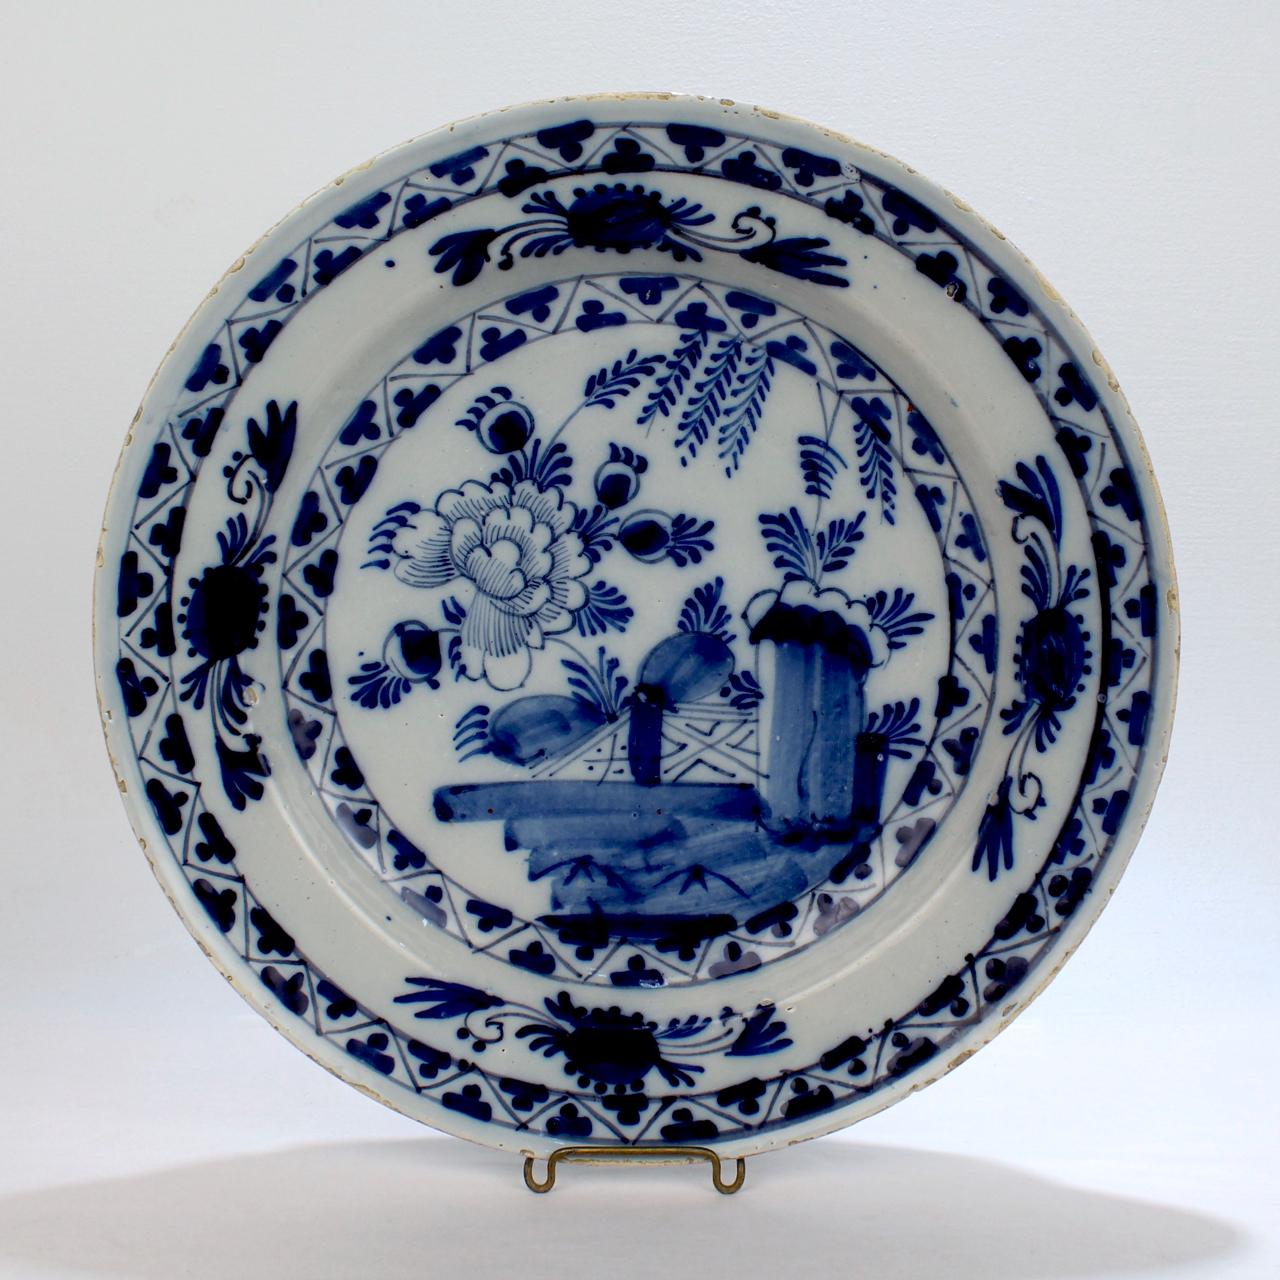 A very fine pair of large, matched Dutch Delft pottery chargers or wall plates.

Dating to the 18th century.

With deep blue Chinoiserie 'Chinese Garden' decoration featuring a large Chrysanthemum blossom.

Measure: Diameter: ca. 13 5/8